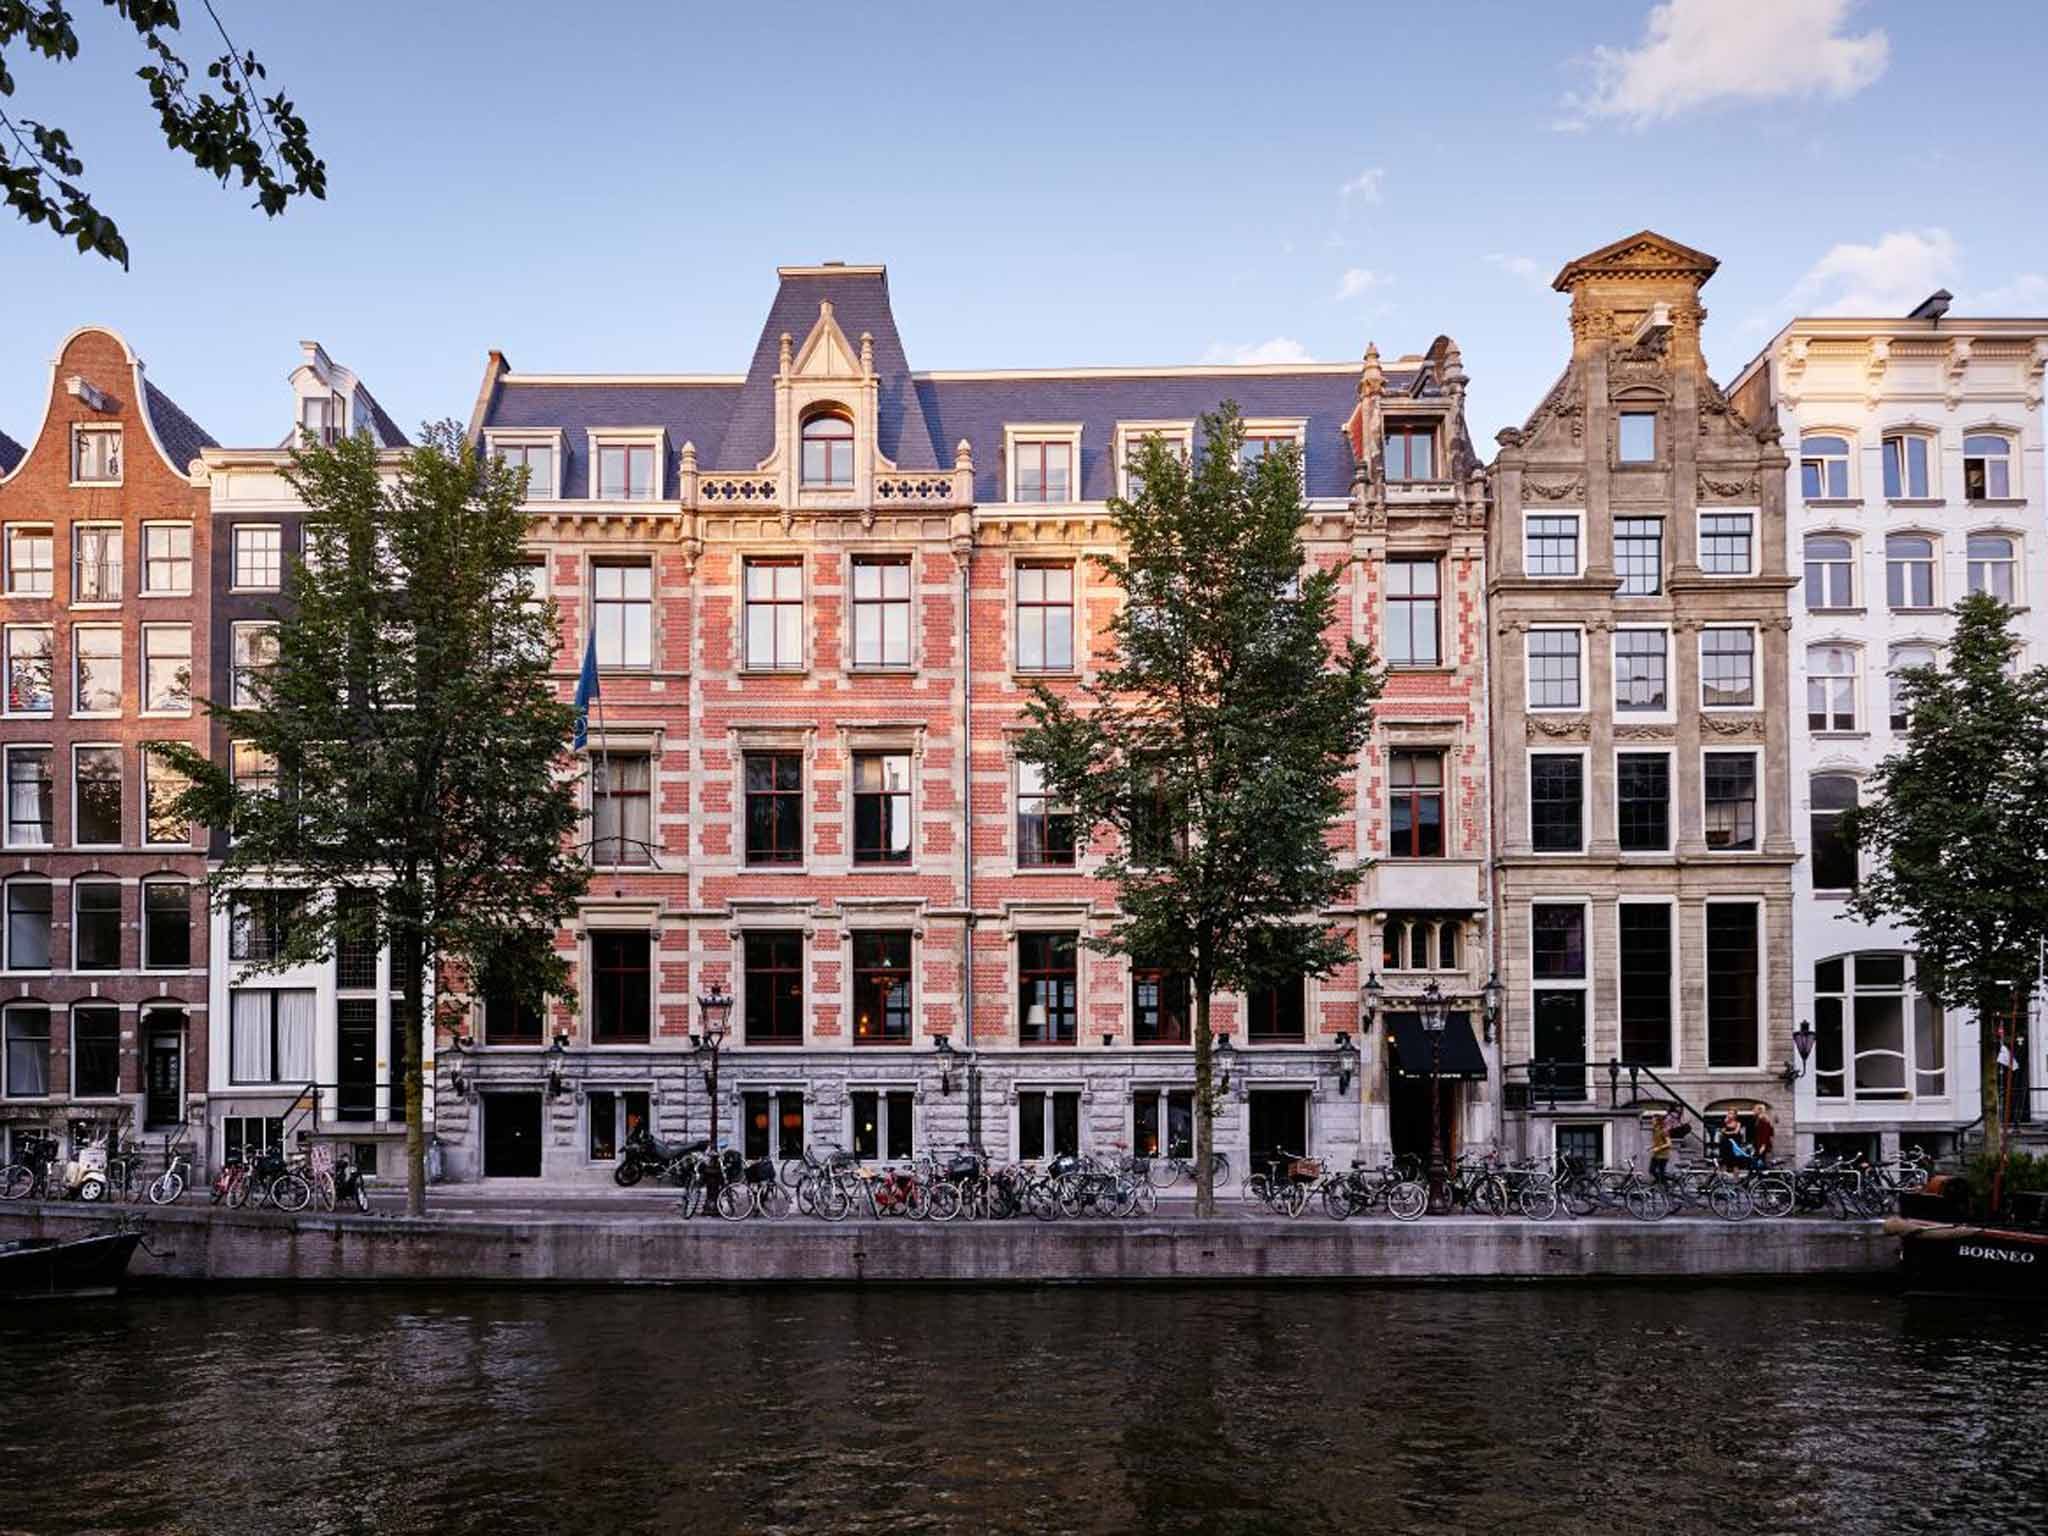 Amsterdam hotels: Canal houses, the old telephone exchange, and a former newspaper office